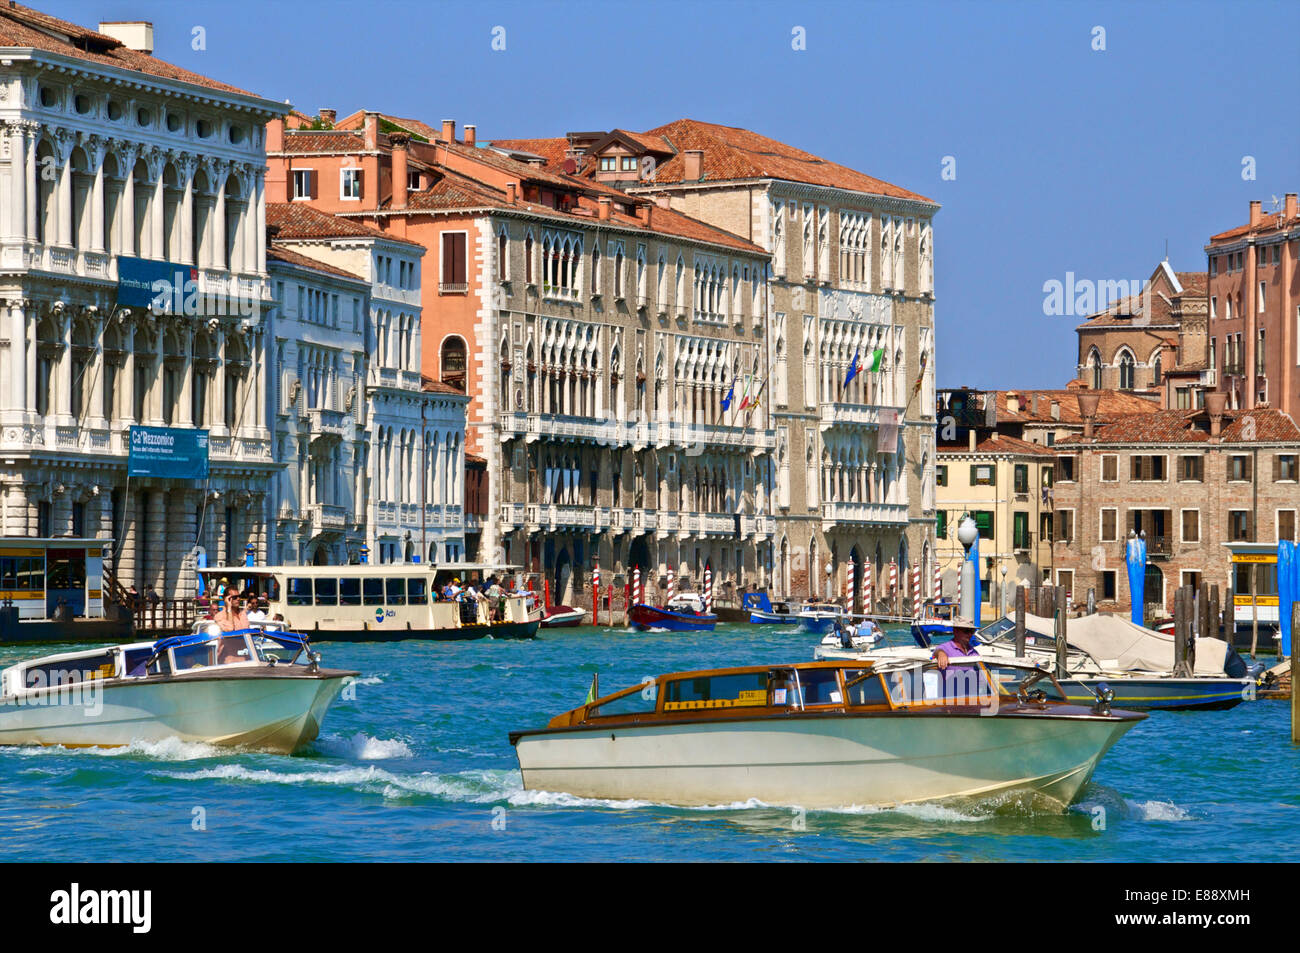 Ca Rezzonico palace facade and other palaces, along the Grand Canal, and boats, San Marco, Venice, UNESCO Site, Veneto, Italy Stock Photo